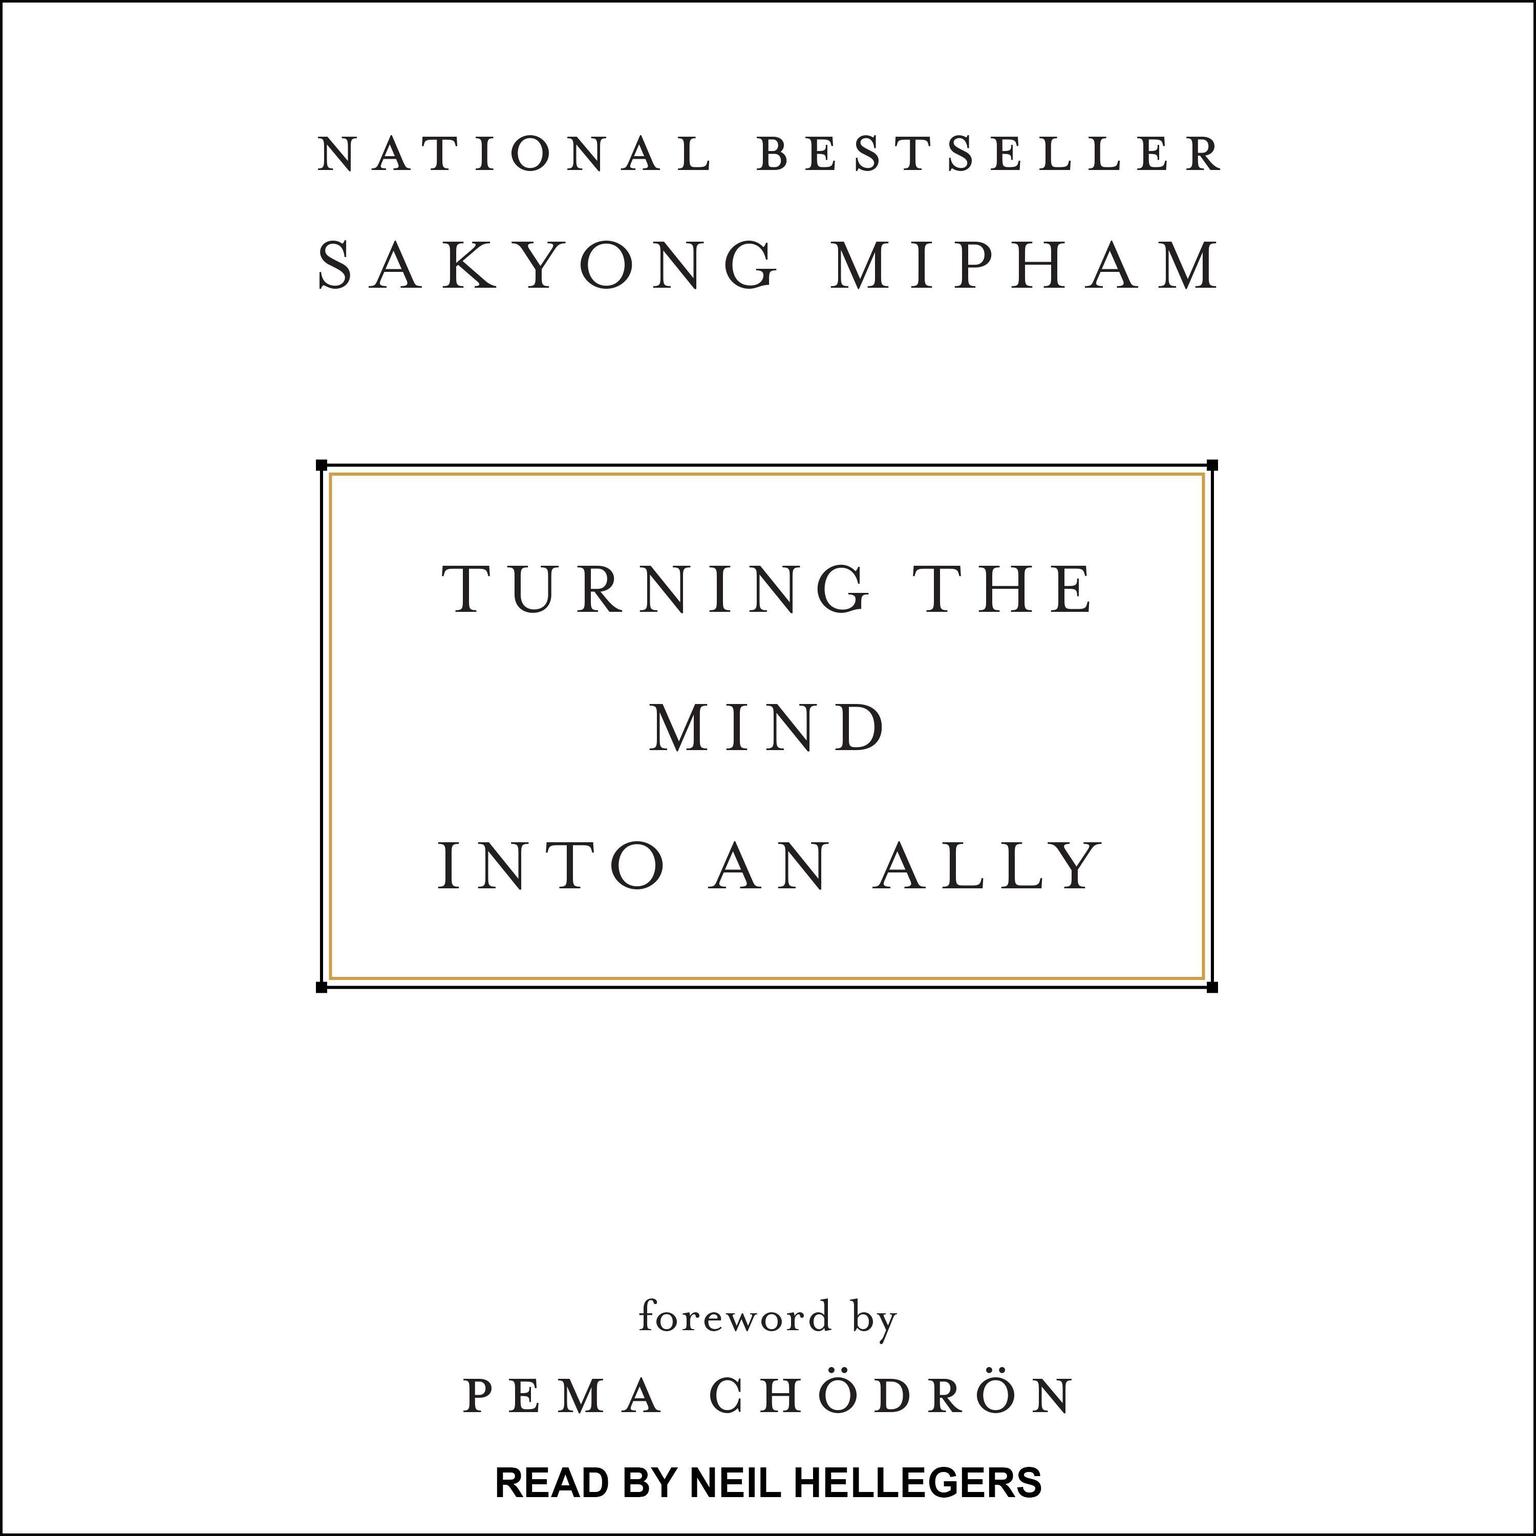 Turning the Mind Into an Ally Audiobook, by Sakyong Mipham